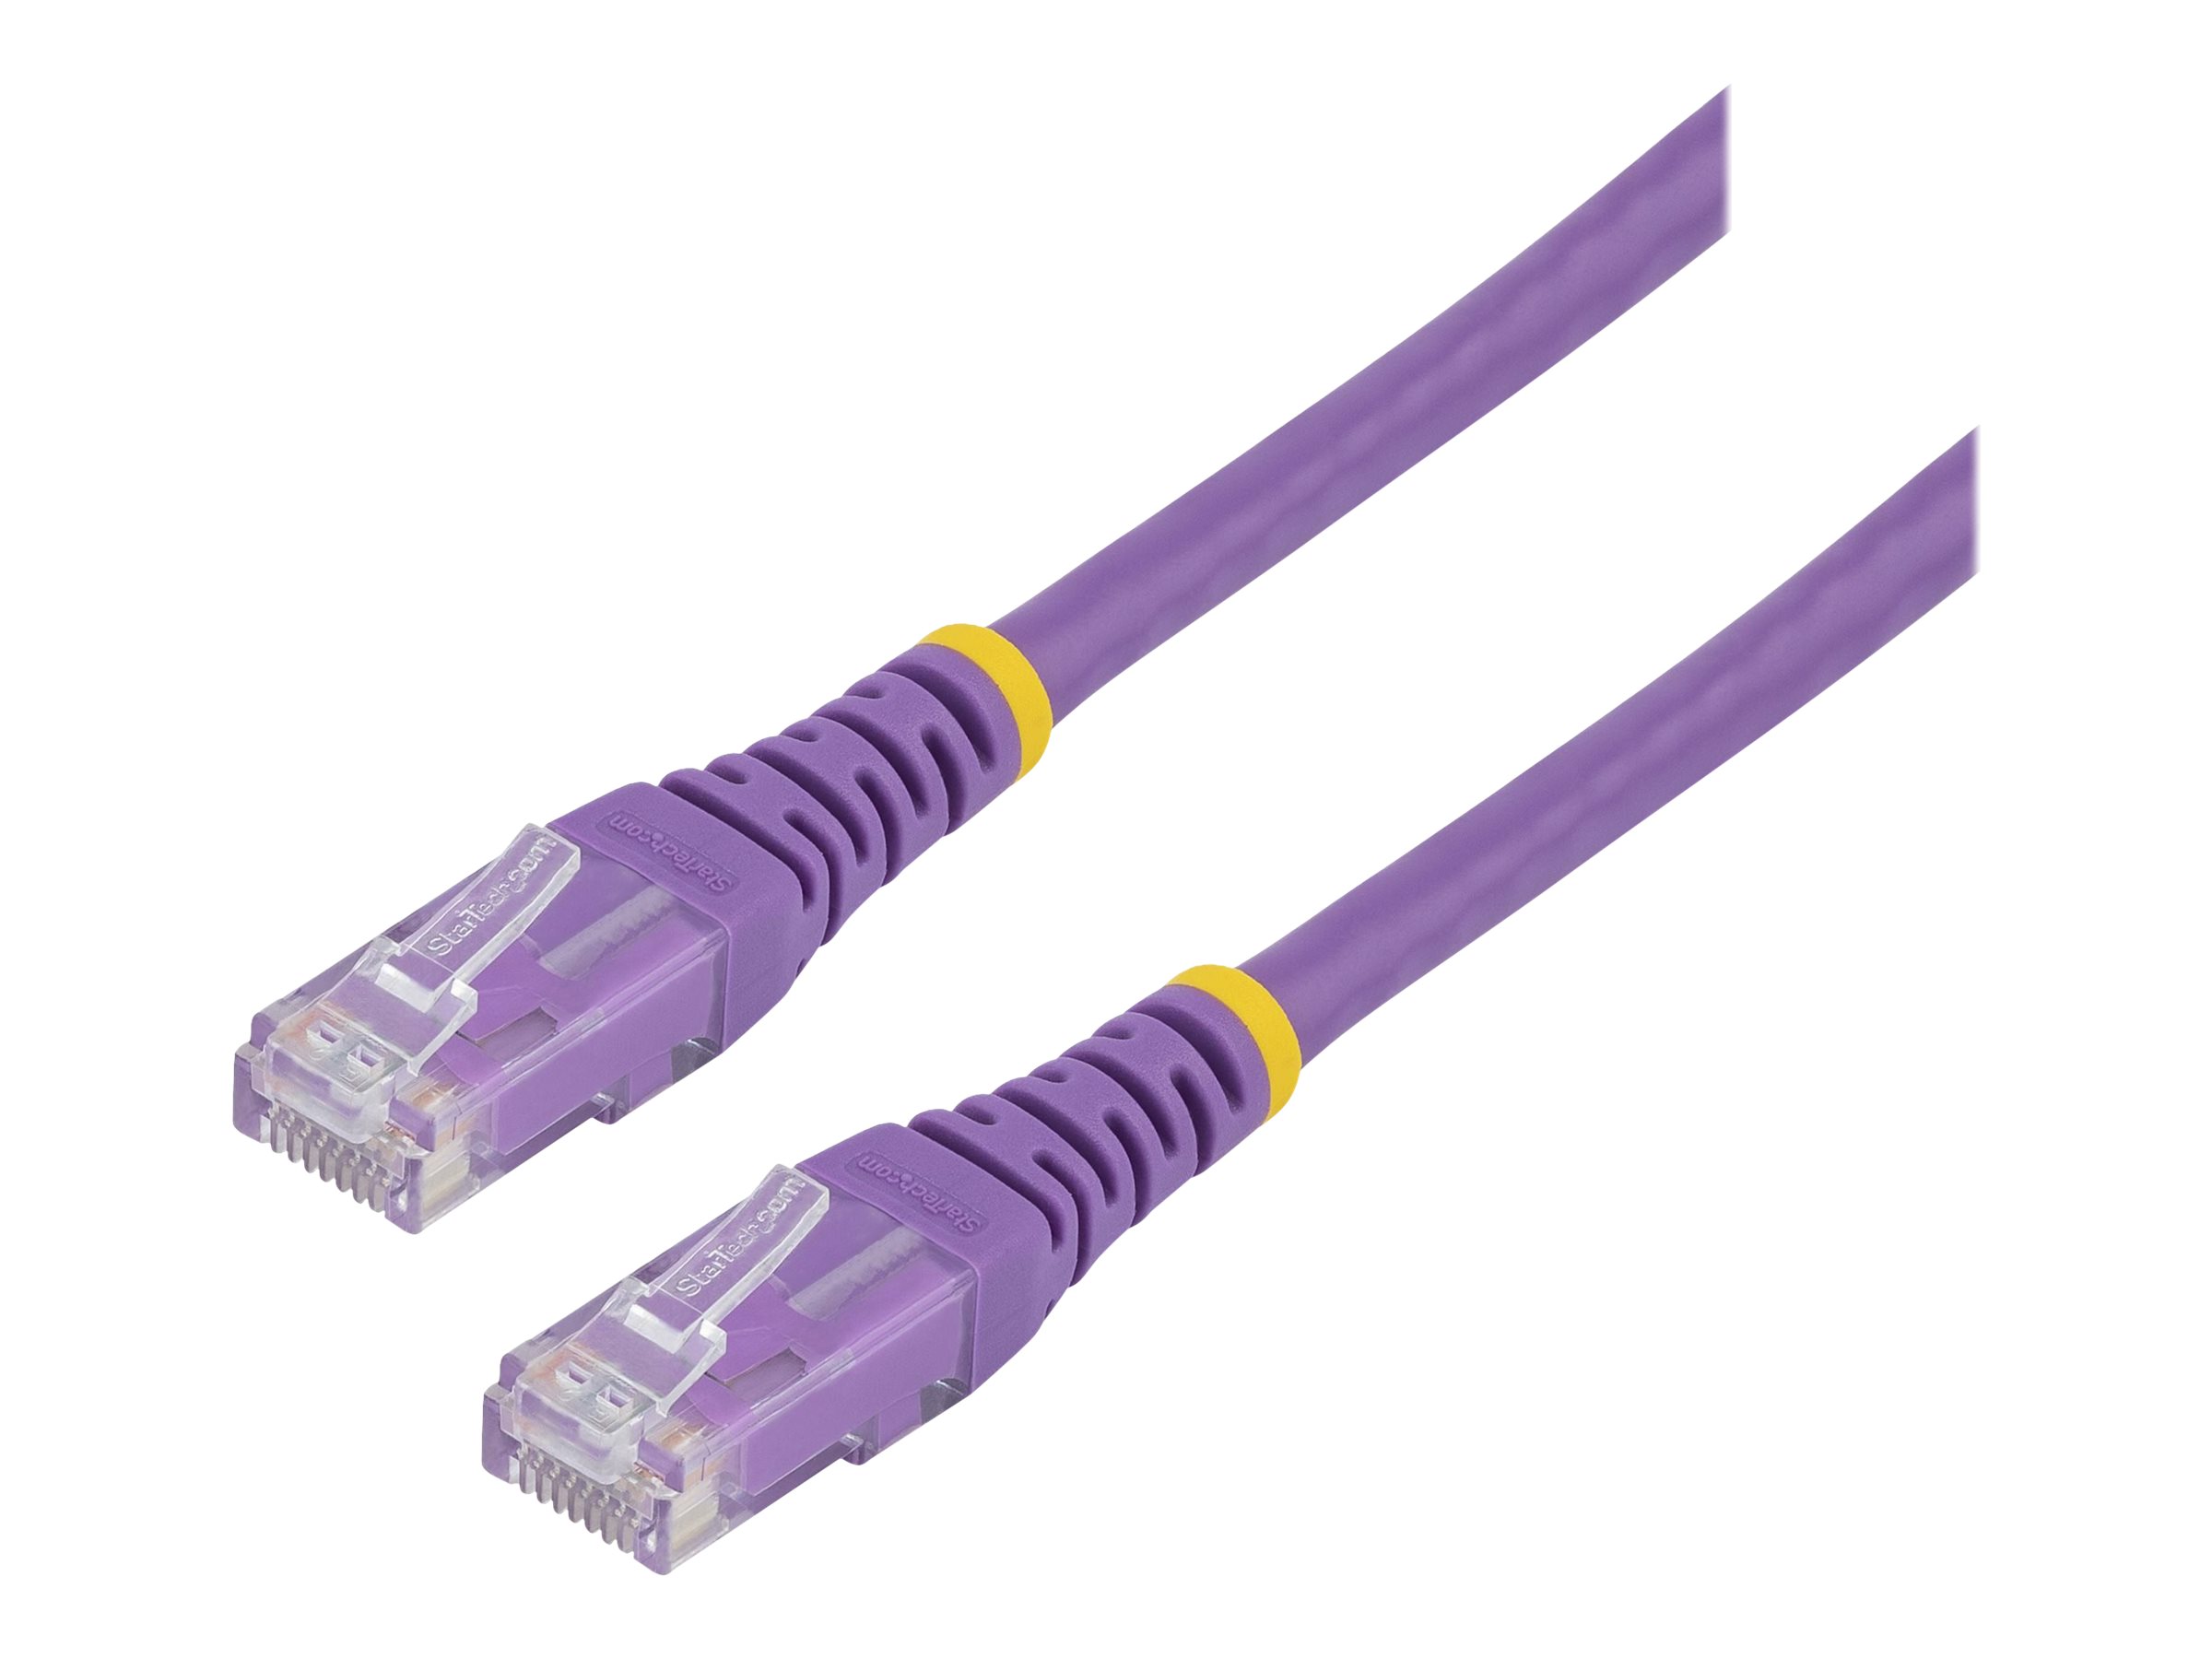 StarTech.com 6ft CAT6 Ethernet Cable, 10 Gigabit Molded RJ45 650MHz 100W PoE Patch Cord, CAT 6 10GbE UTP Network Cable with Strain Relief, Purple, Fluke Tested/Wiring is UL Certified/TIA